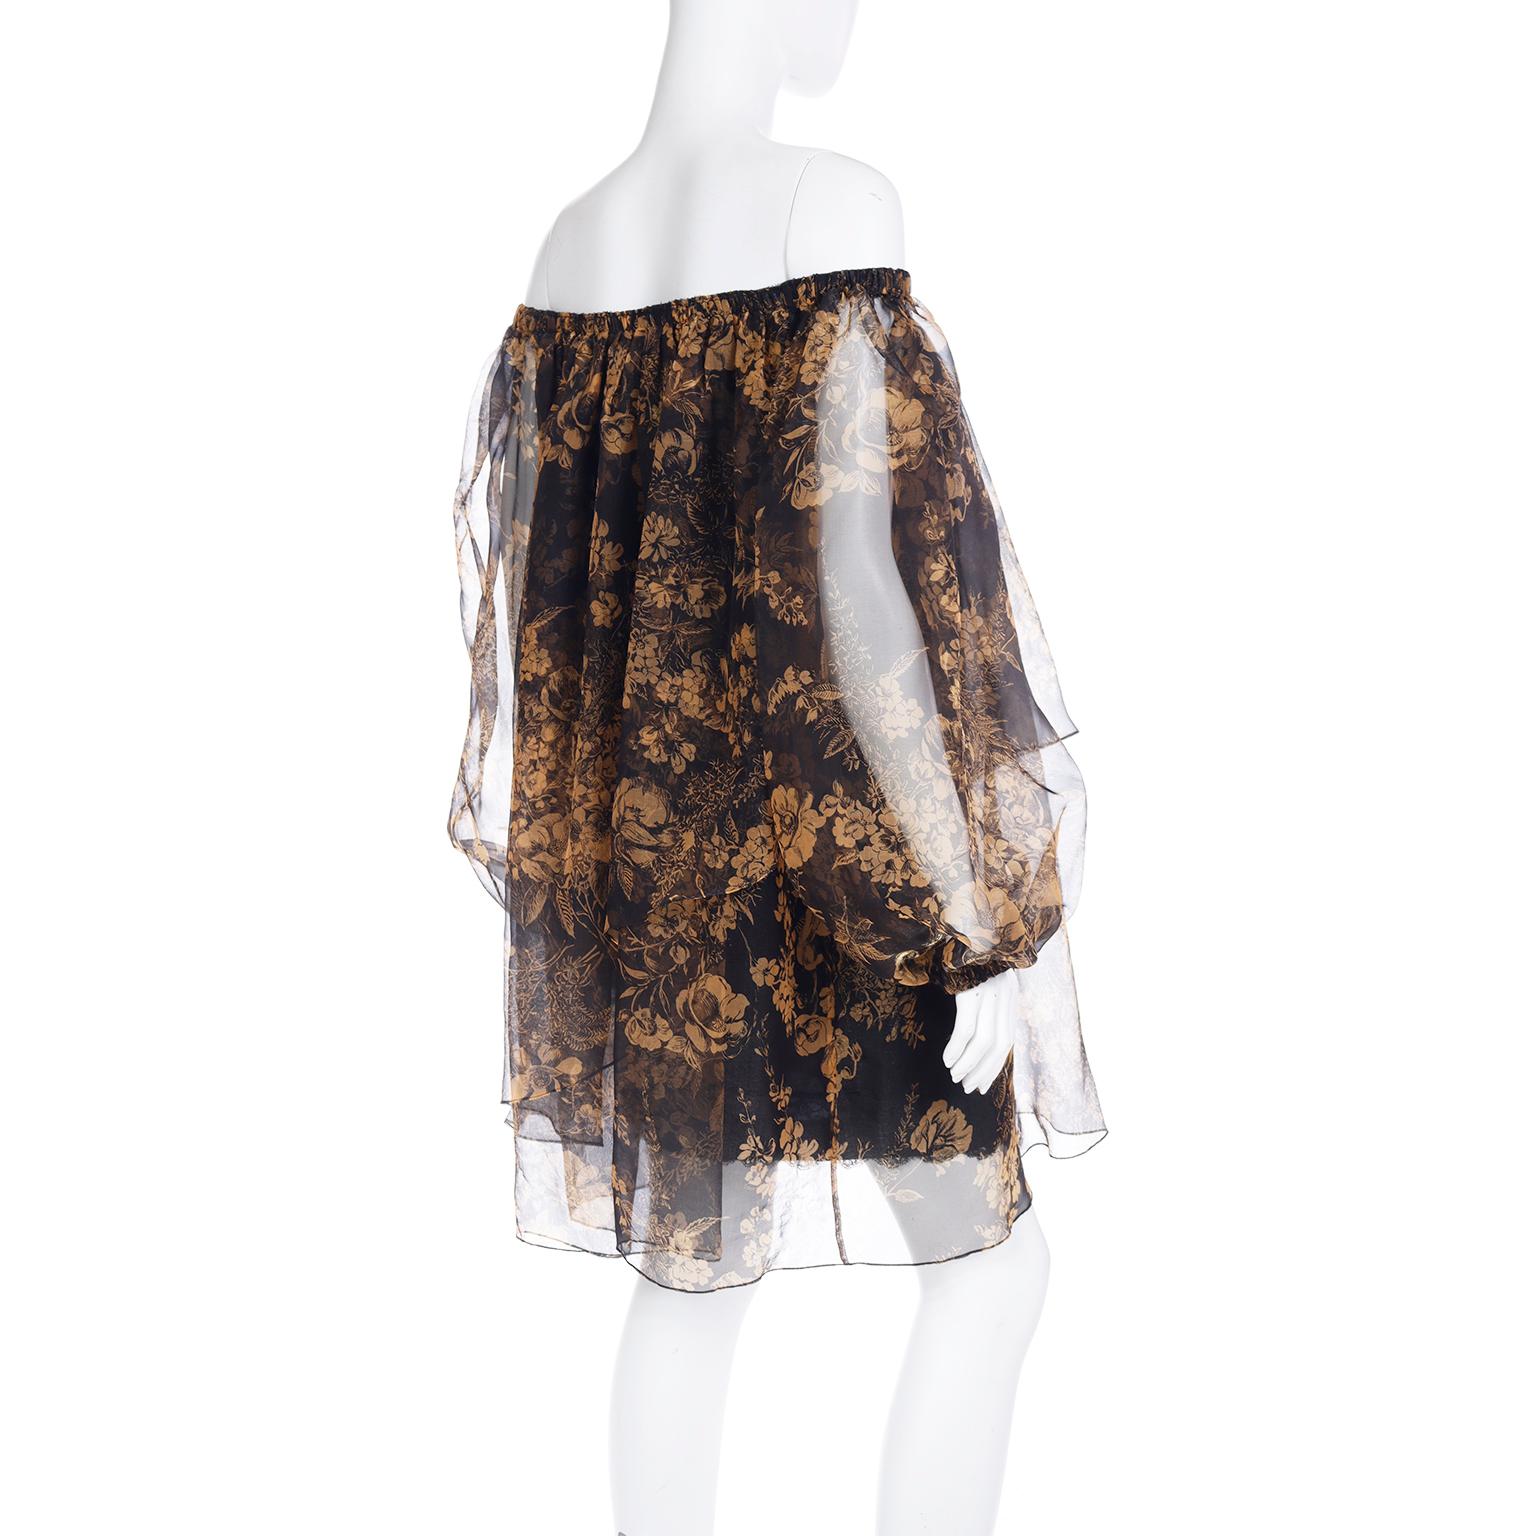 1990 Yves Saint Laurent Black and Gold Chiffon Dress With Sheer Balloon Sleeves For Sale 3